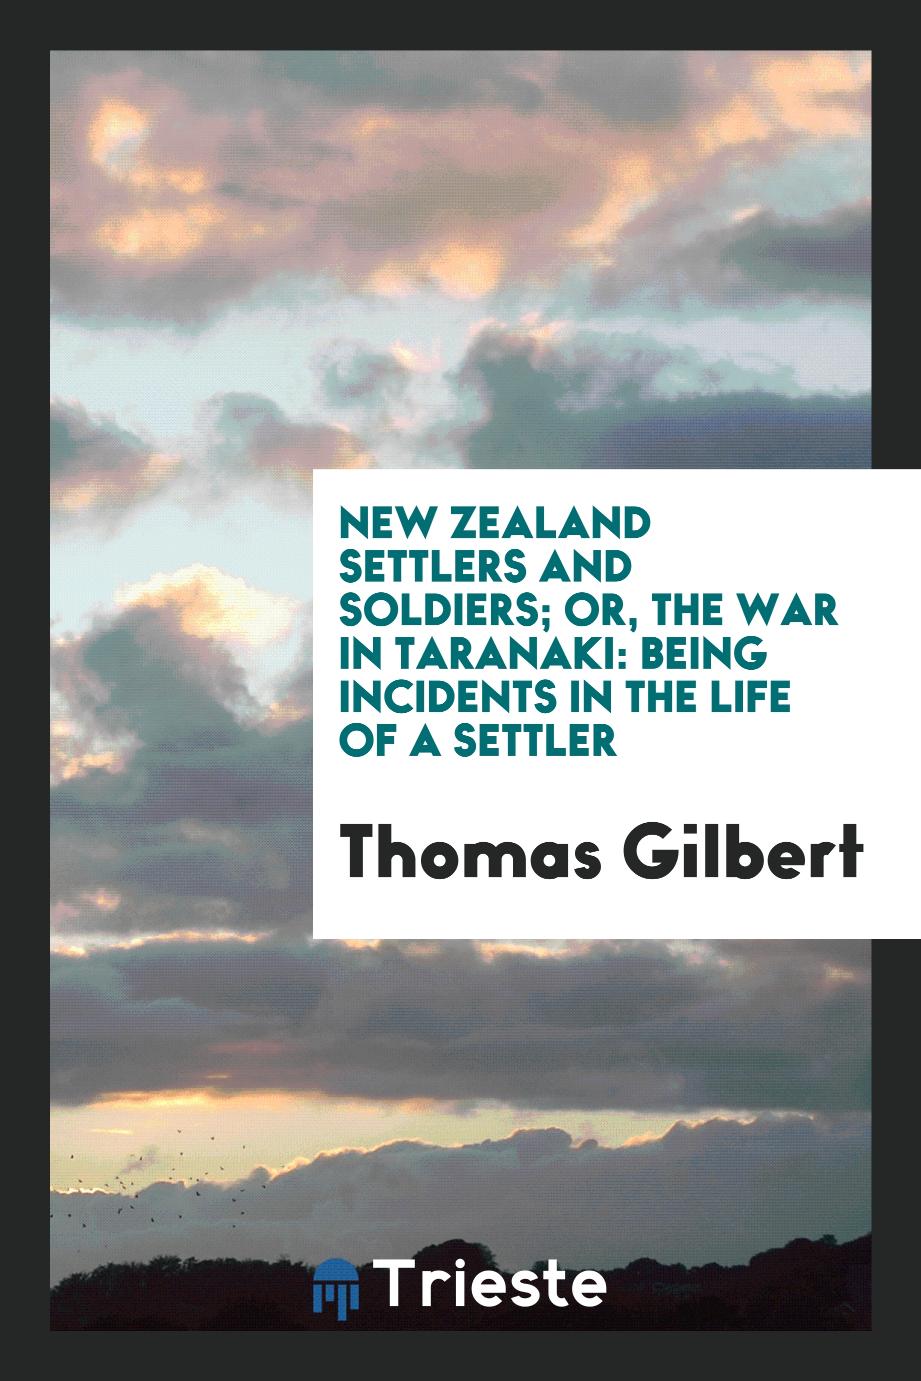 New Zealand Settlers and Soldiers; Or, The War in Taranaki: Being Incidents in the Life of a Settler